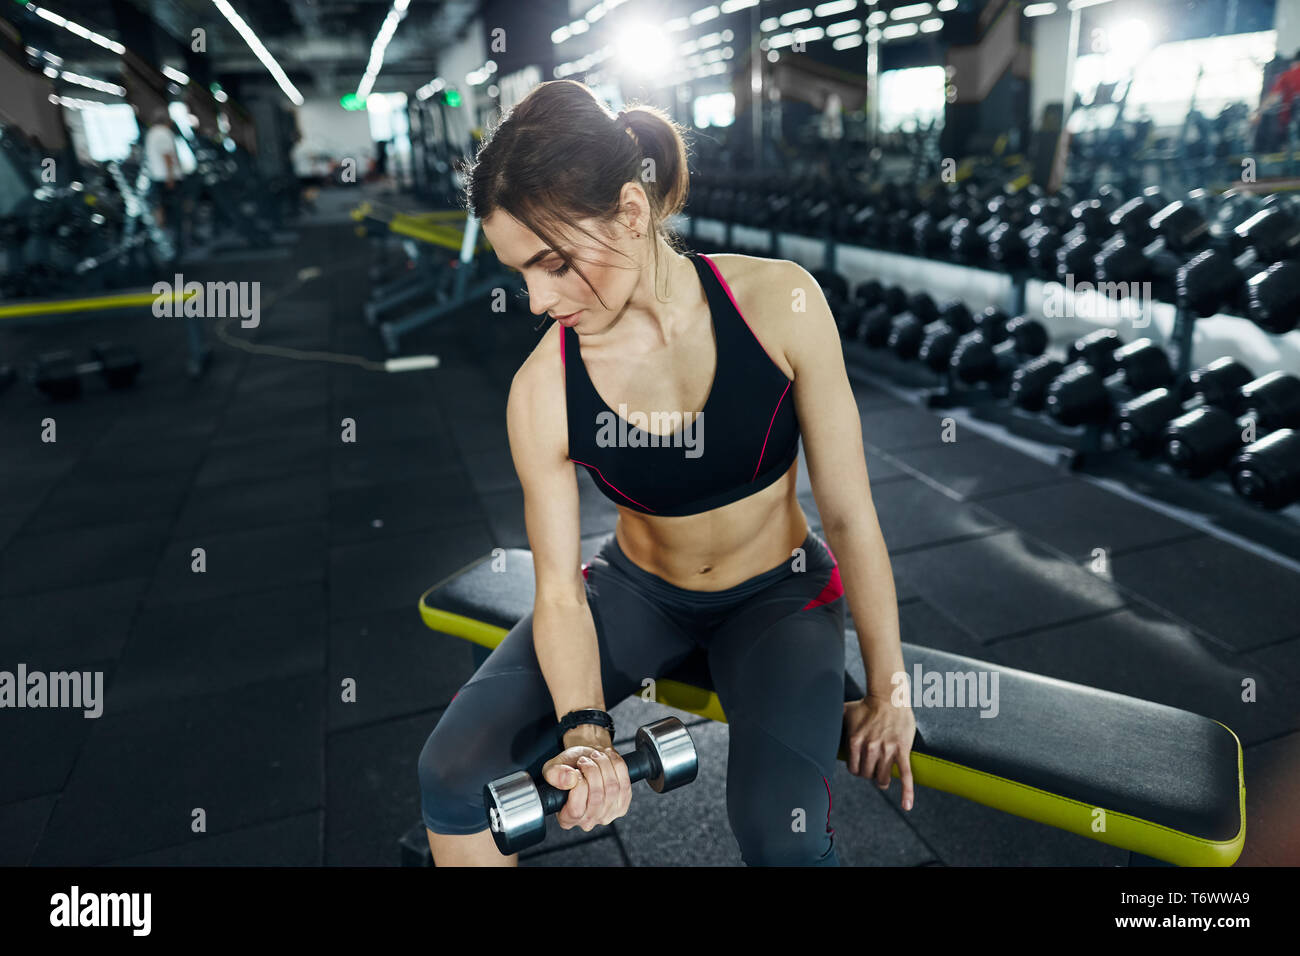 Fit girl with red short hair in gym Stock Photo - Alamy